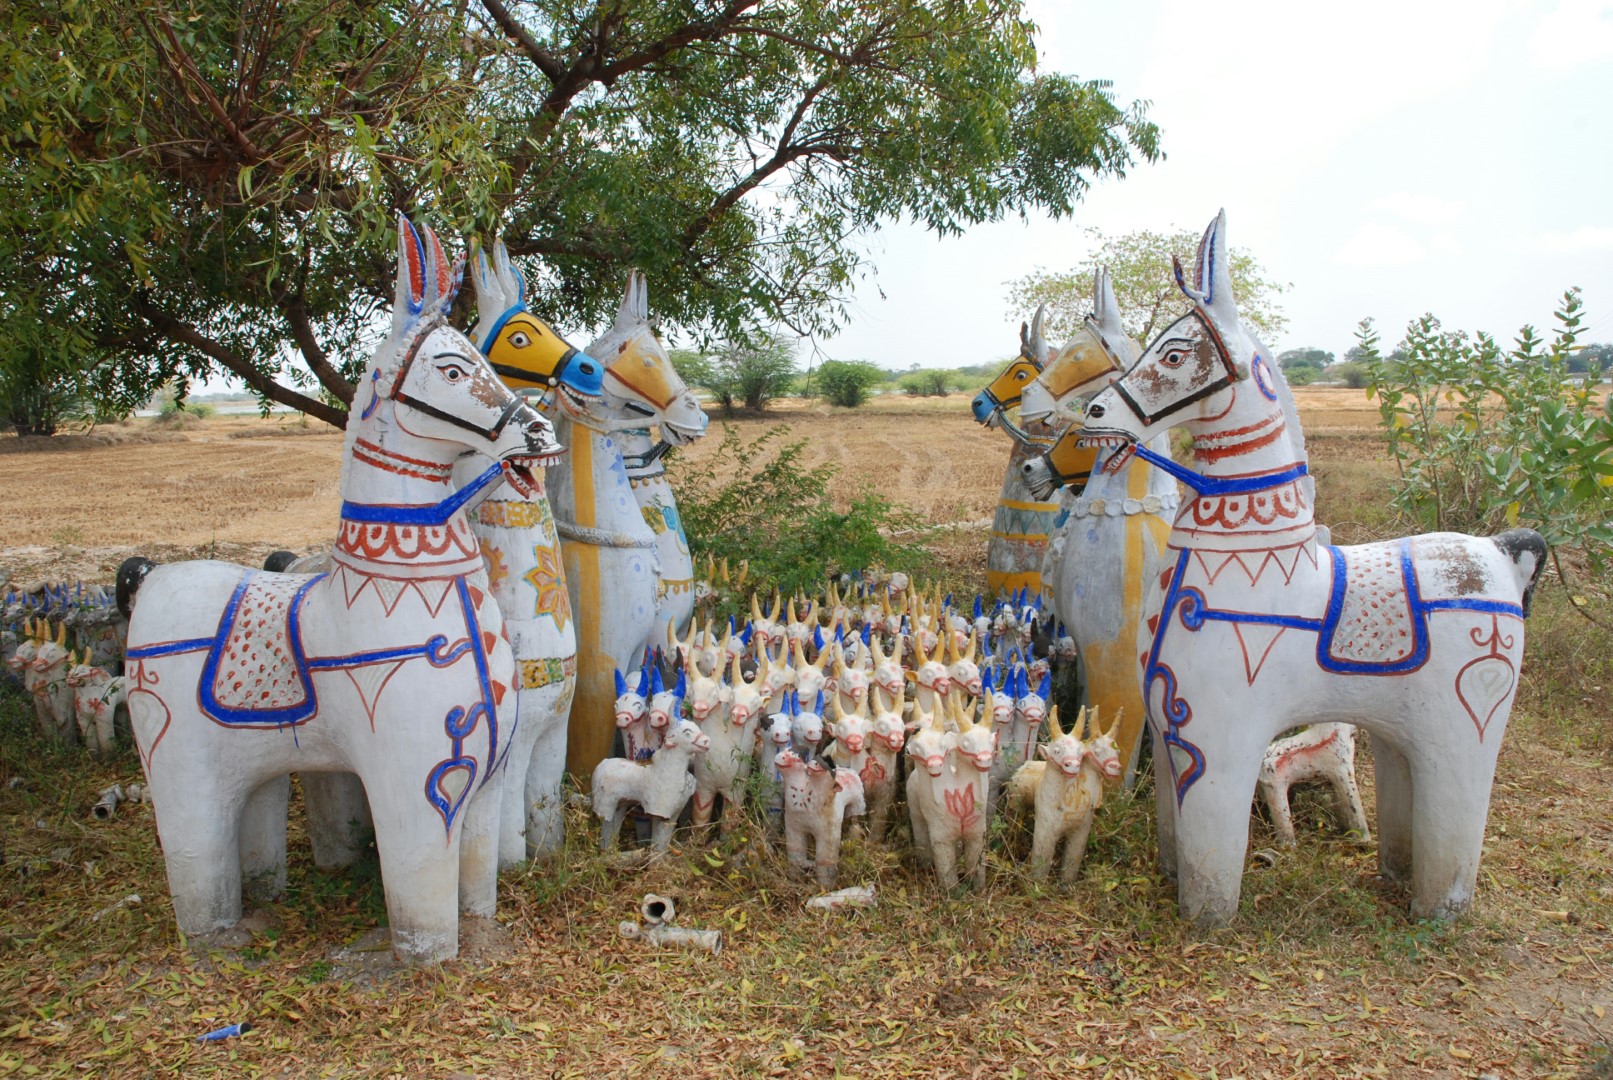 <span style="font-weight:normal;">In Karur, which is less a shrine than a group of statues in the middle of paddy fields and pasture, only two sorts of offerings are given at a small yearly festival: two life-sized horses and a few dozen double-headed cows. (This unusual creature represents the pair of bullocks needed to pull a bullock-cart, a ubiquitous vehicle in rural Tamil Nadu.)</span>